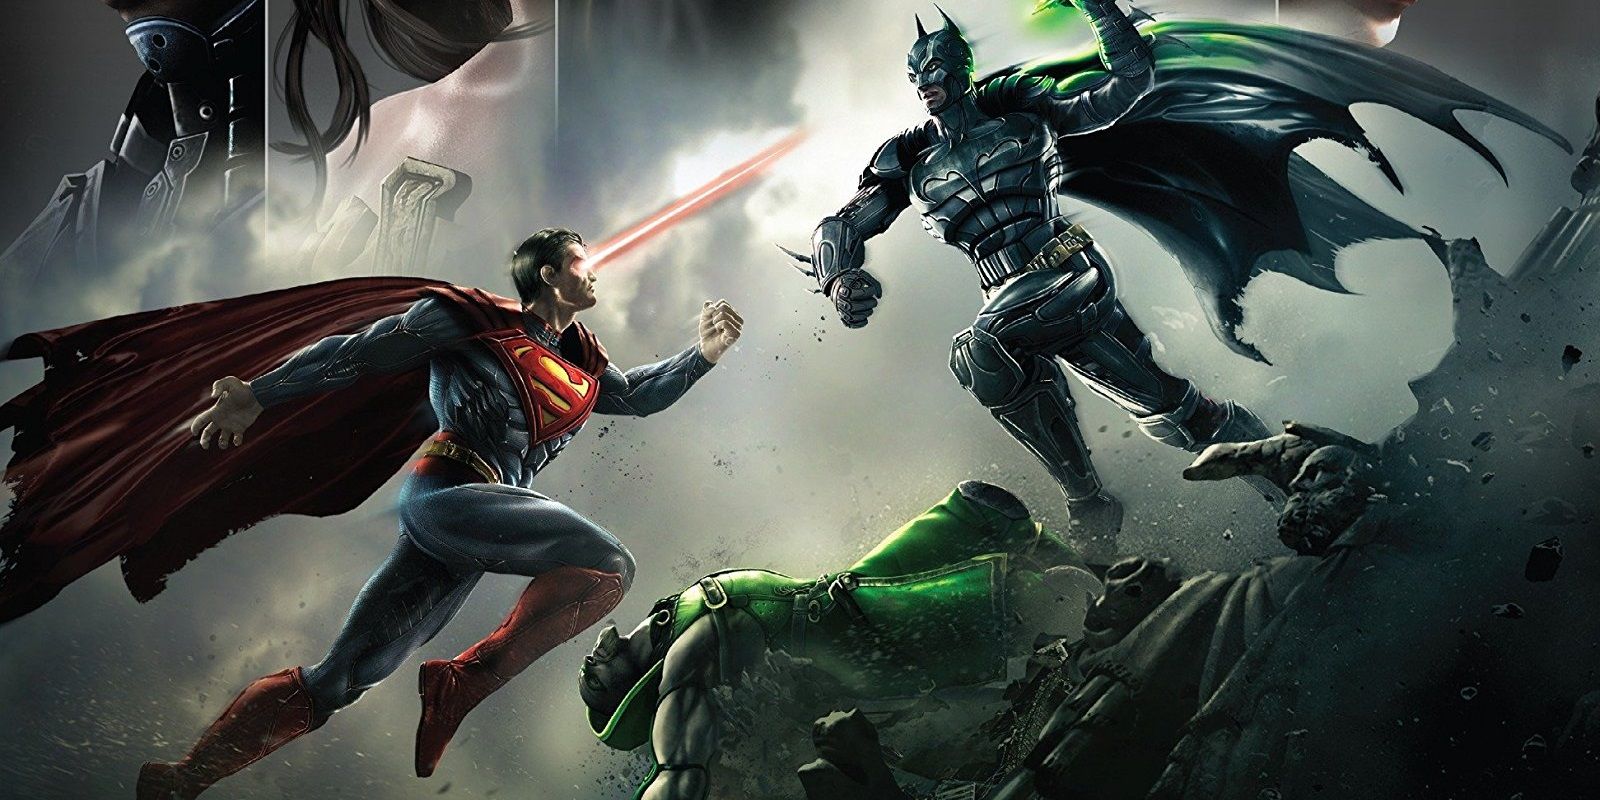 DC's next animated film is Injustice